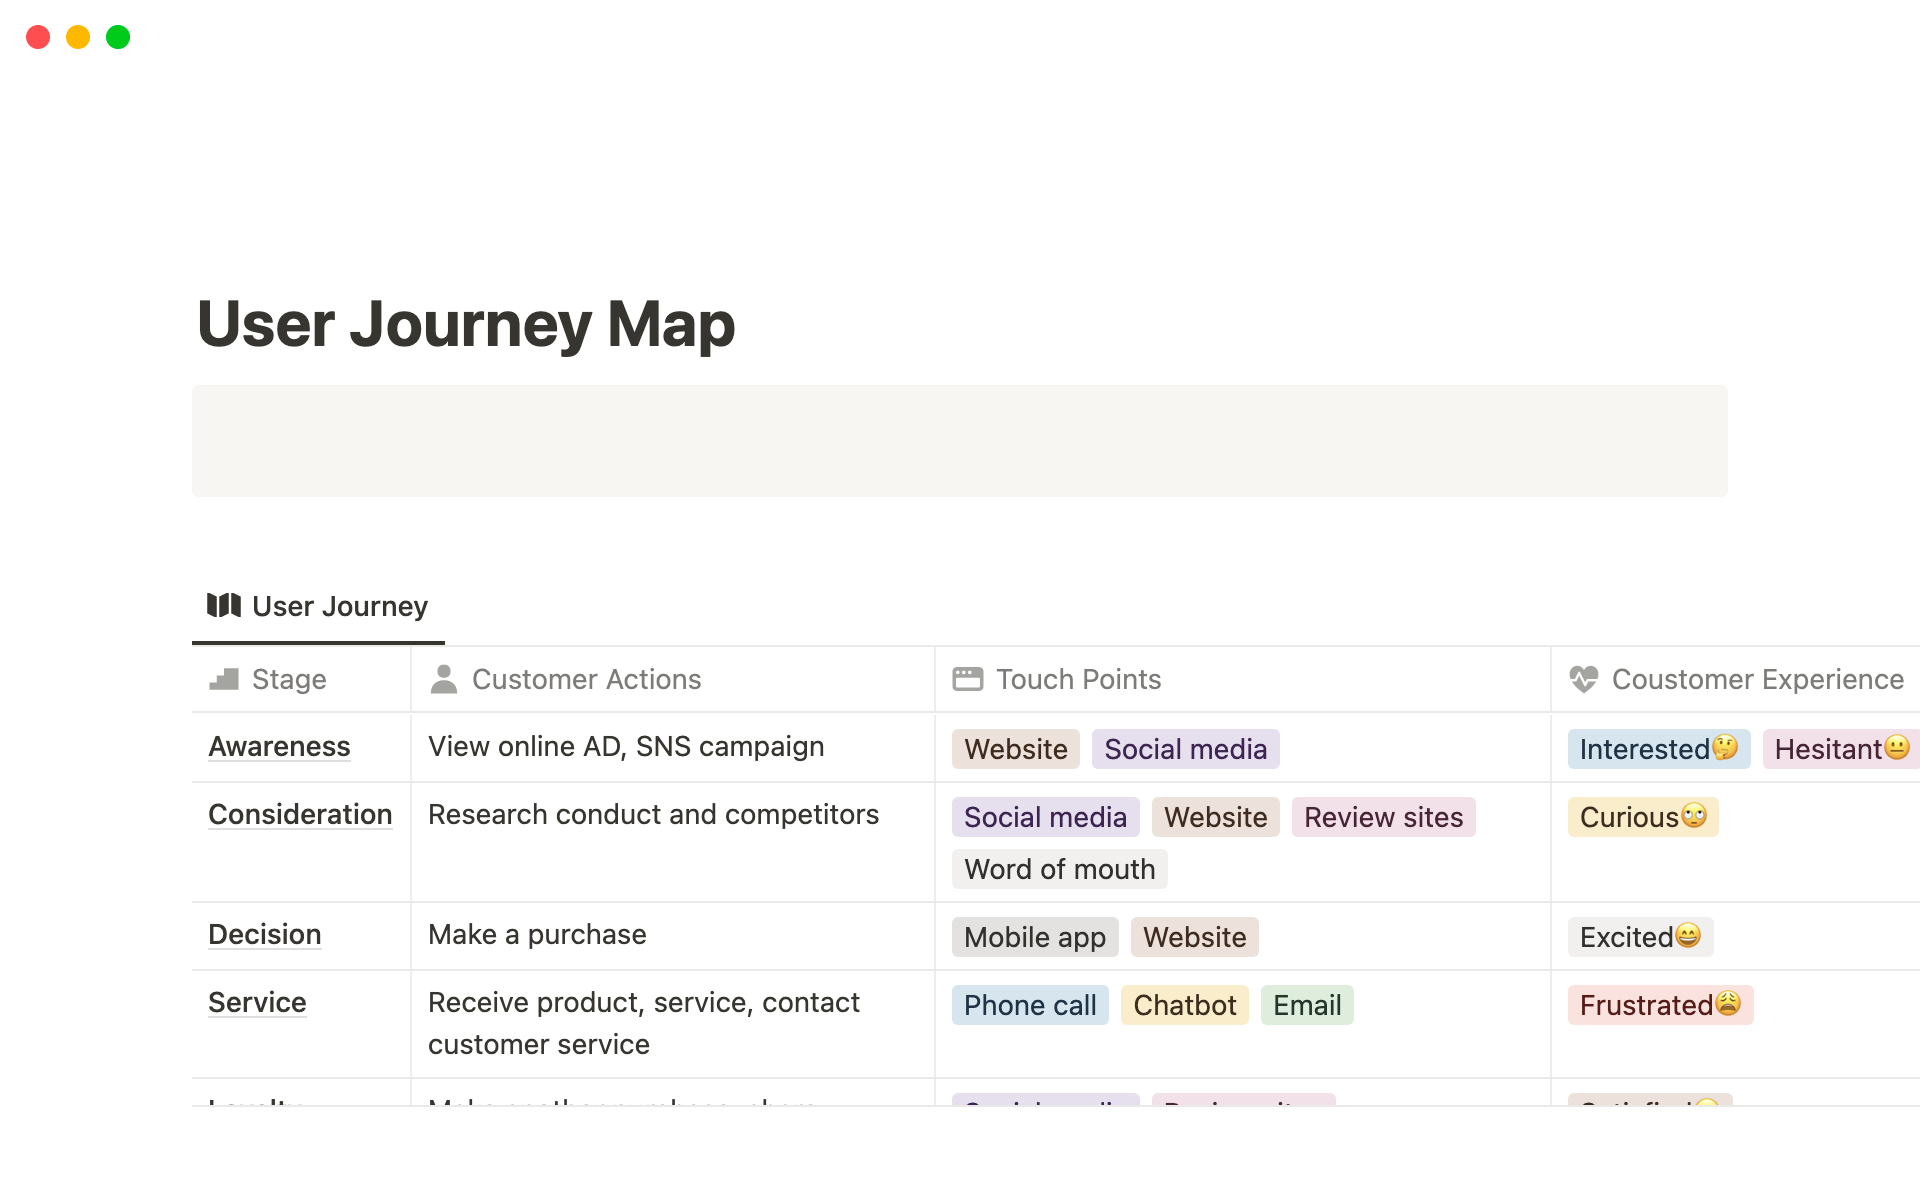 You can visualize the user journey map using a Mermaid graph.